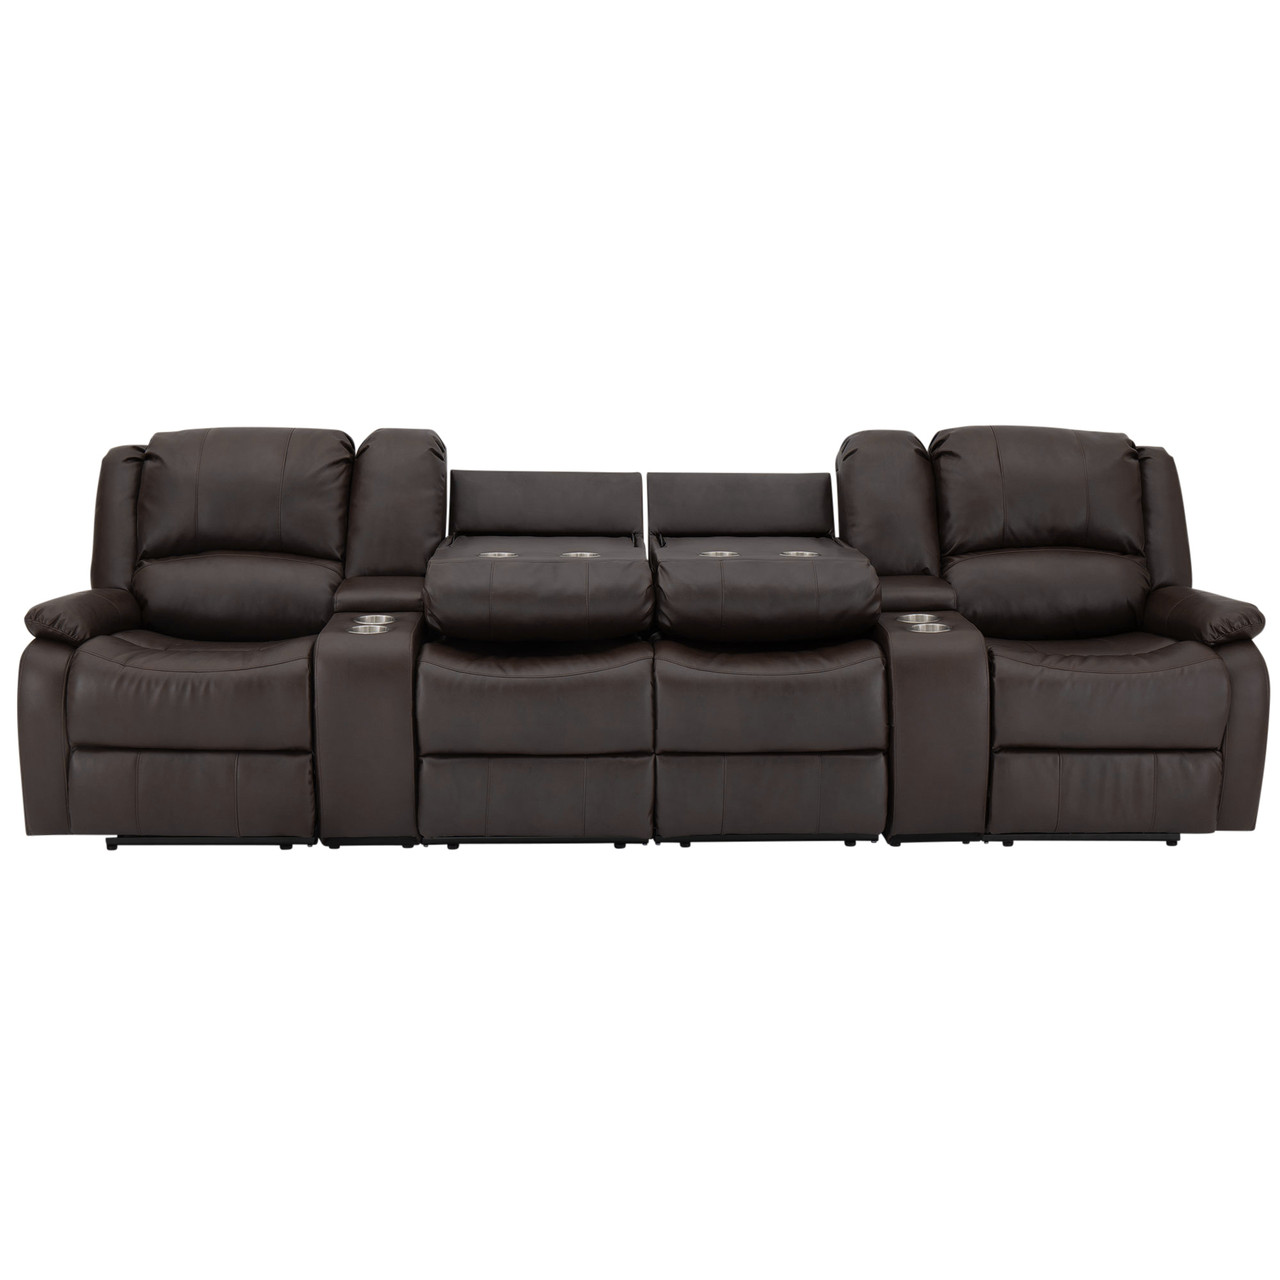 RecPro Charles 120 Quad Wall Hugger RV Recliner Sofa with Two Drop Down Consoles